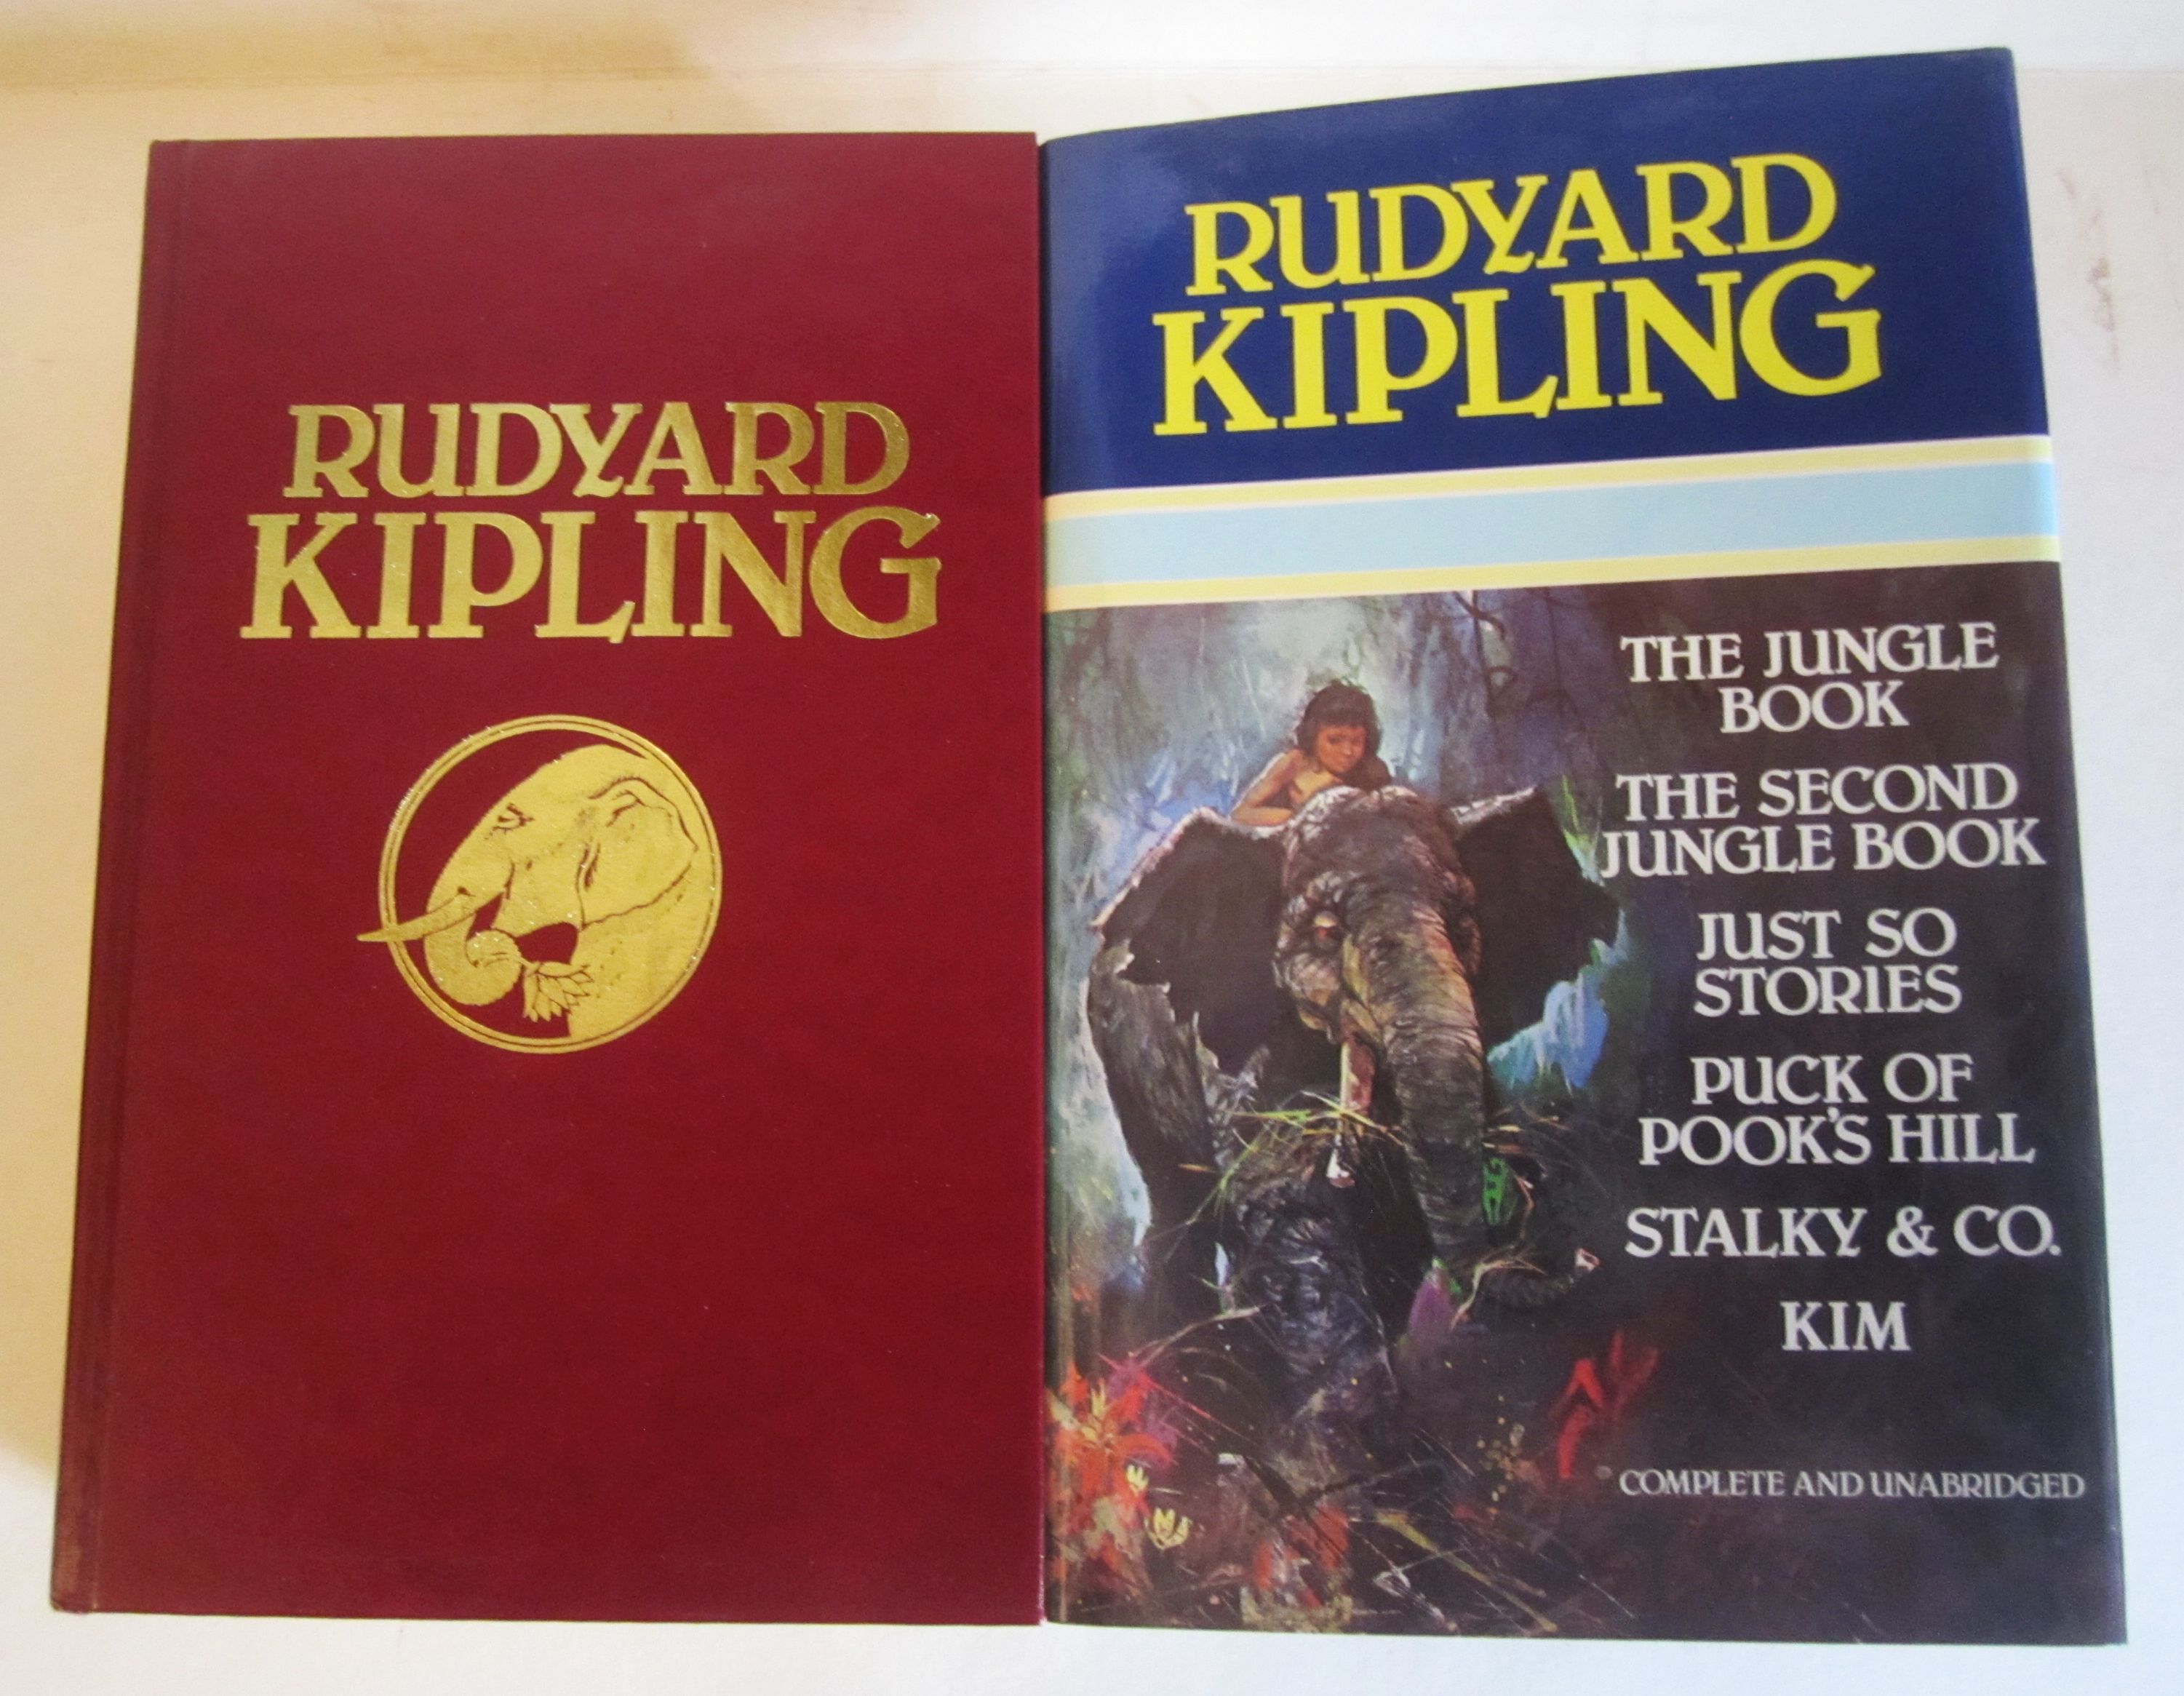 The Jungle Book. The Second Jungle Book. Just So Stories. Puck of Pook's Hill. Stalky & Co. Kim. - Kipling, Rudyard